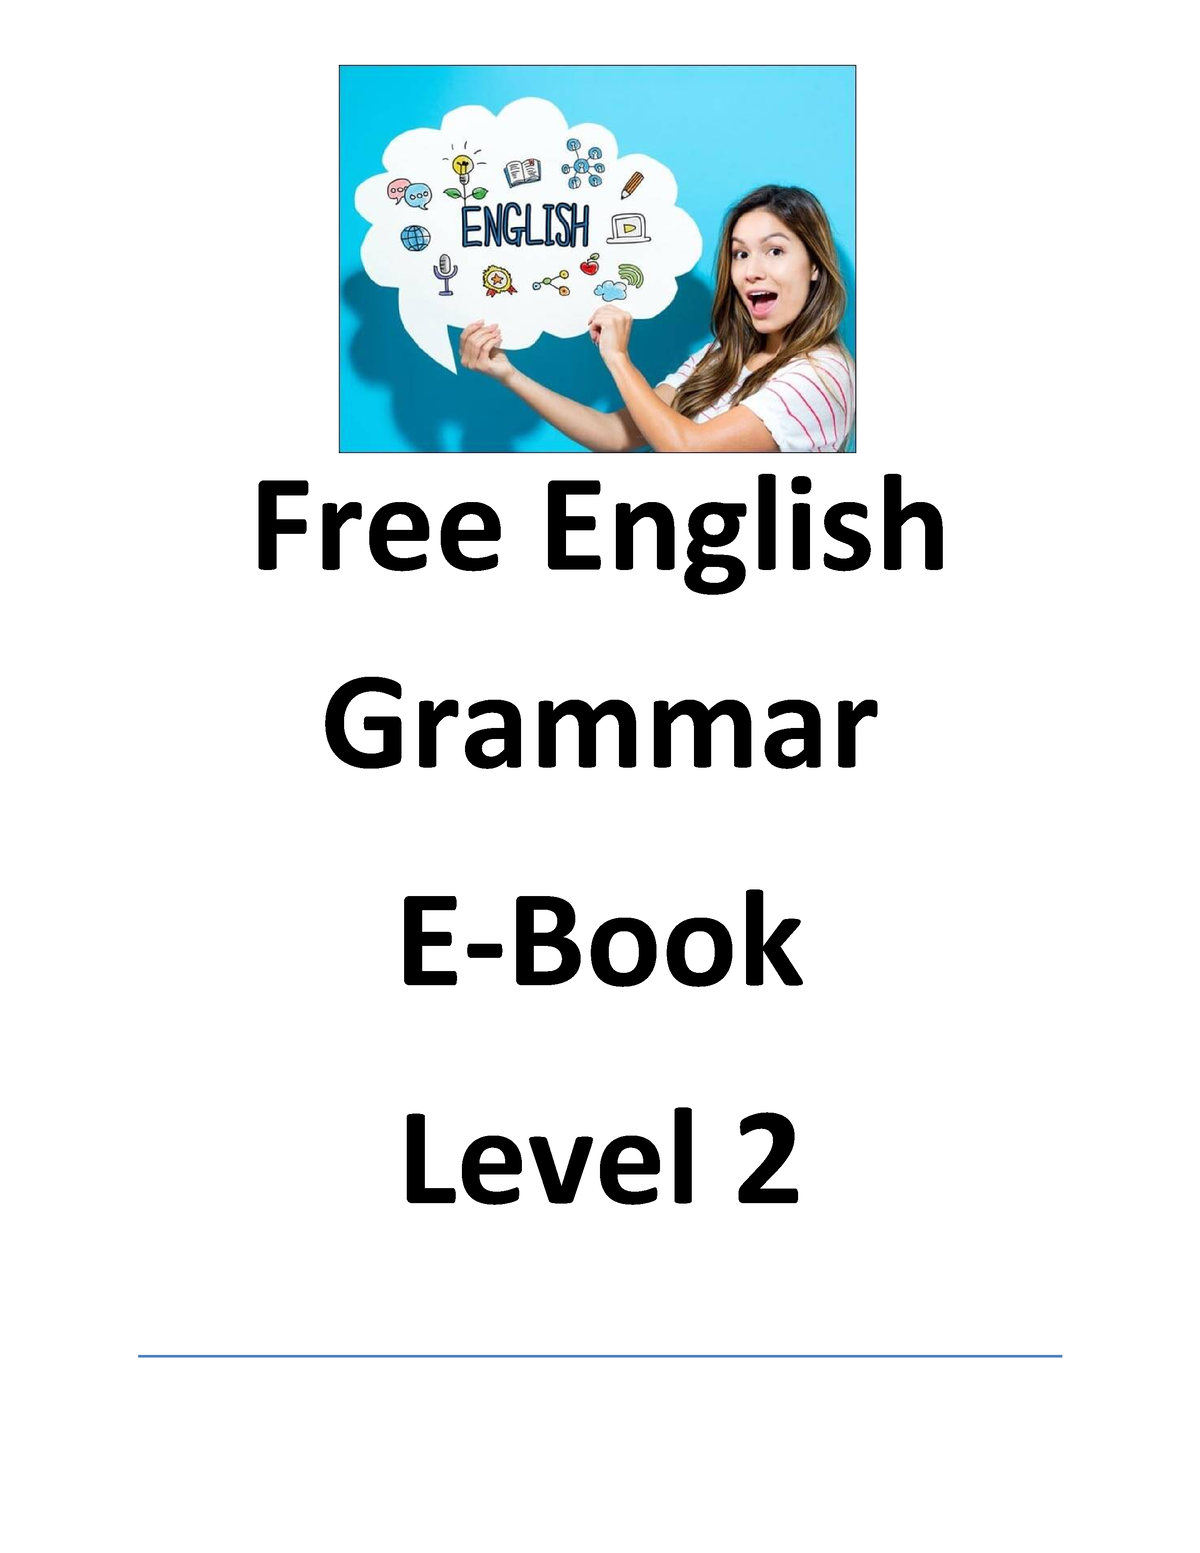 How To Test English Grammar Level